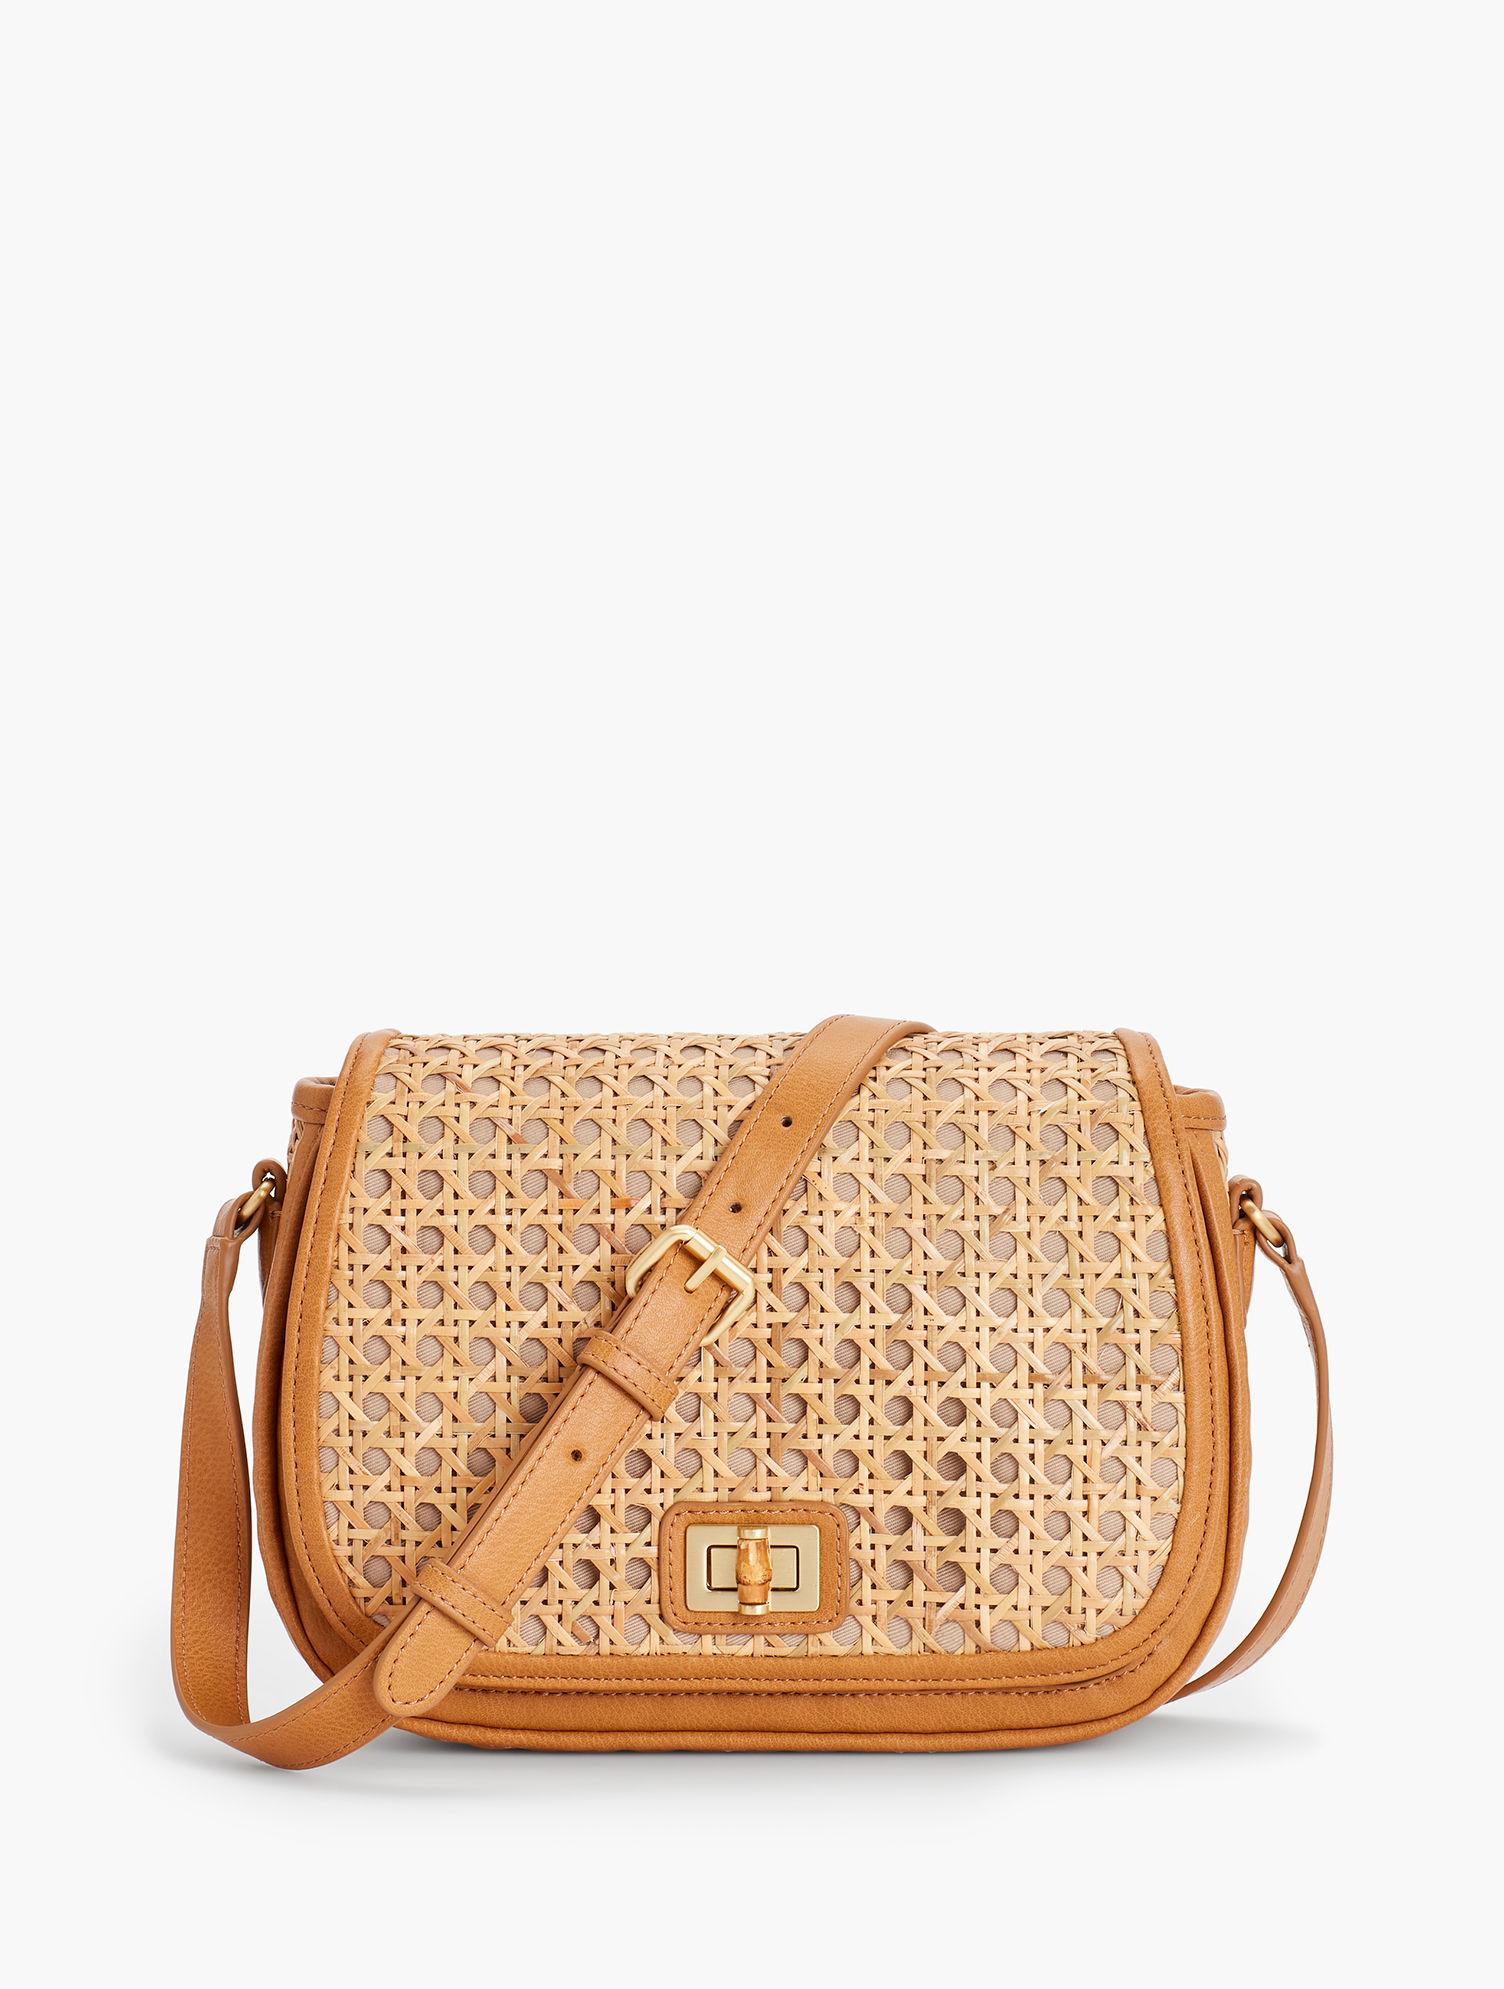 Talbots Caning Rattan Crossbody Bag in Natural | Lyst